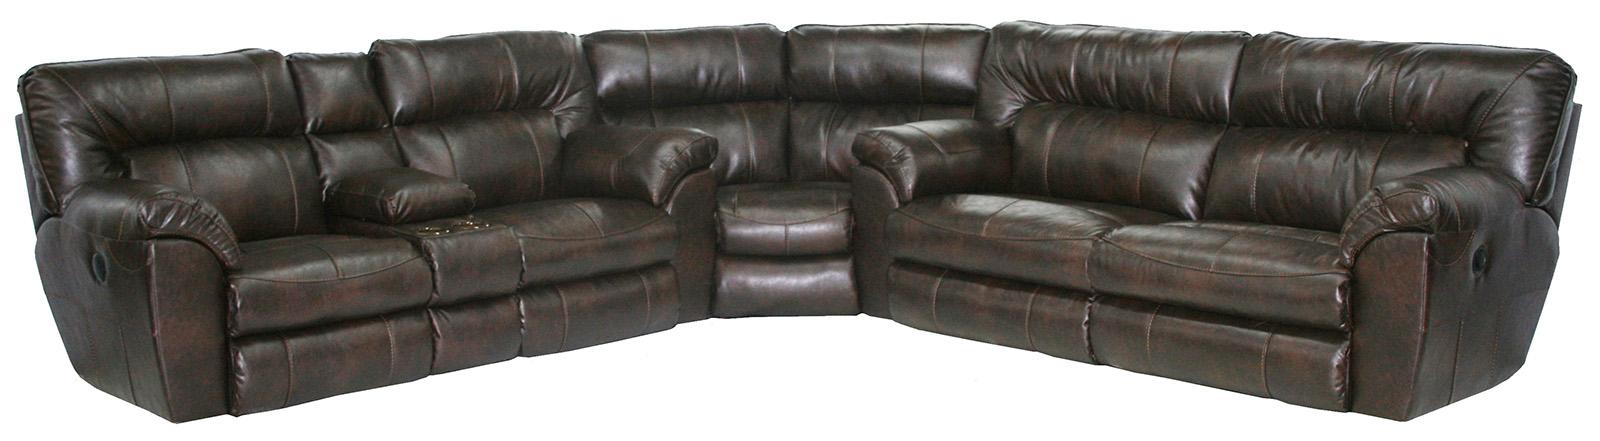 Catnapper Nolan Power Extra Wide Reclining Console Loveseat w/ Storage & Cupholder in Godiva - Factory Furniture Outlet Store